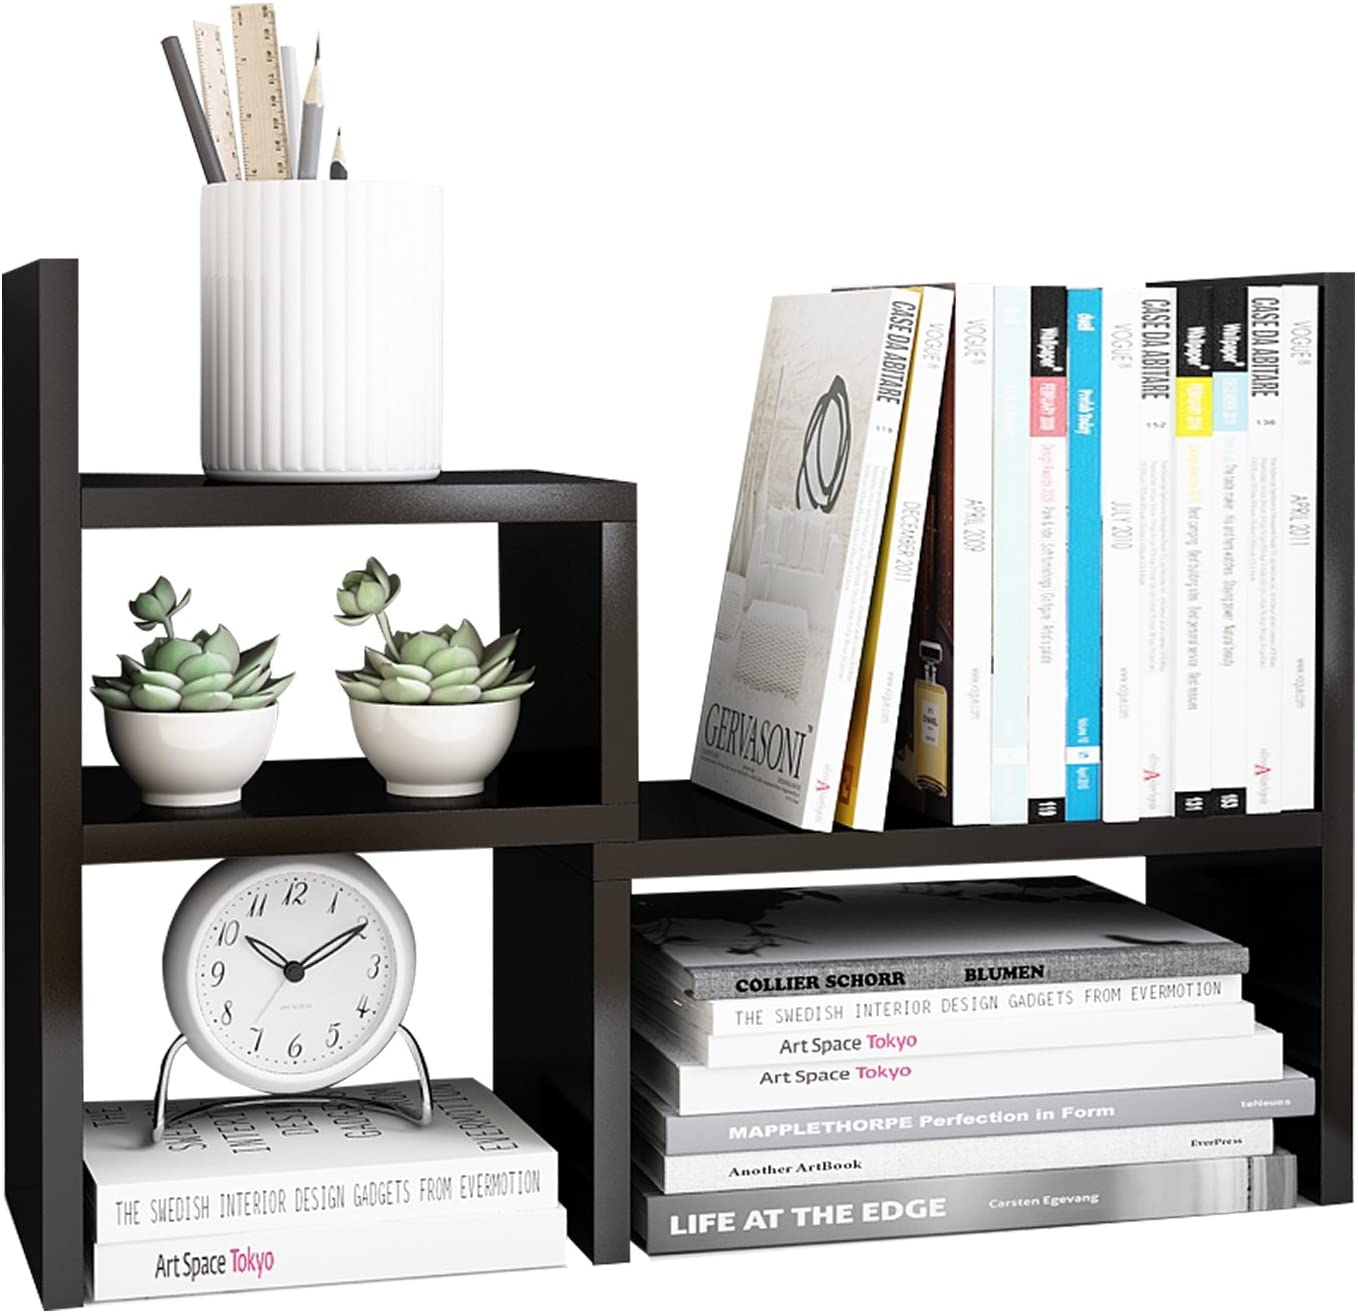 Do you need a storage rack to set up a productive workspace at home